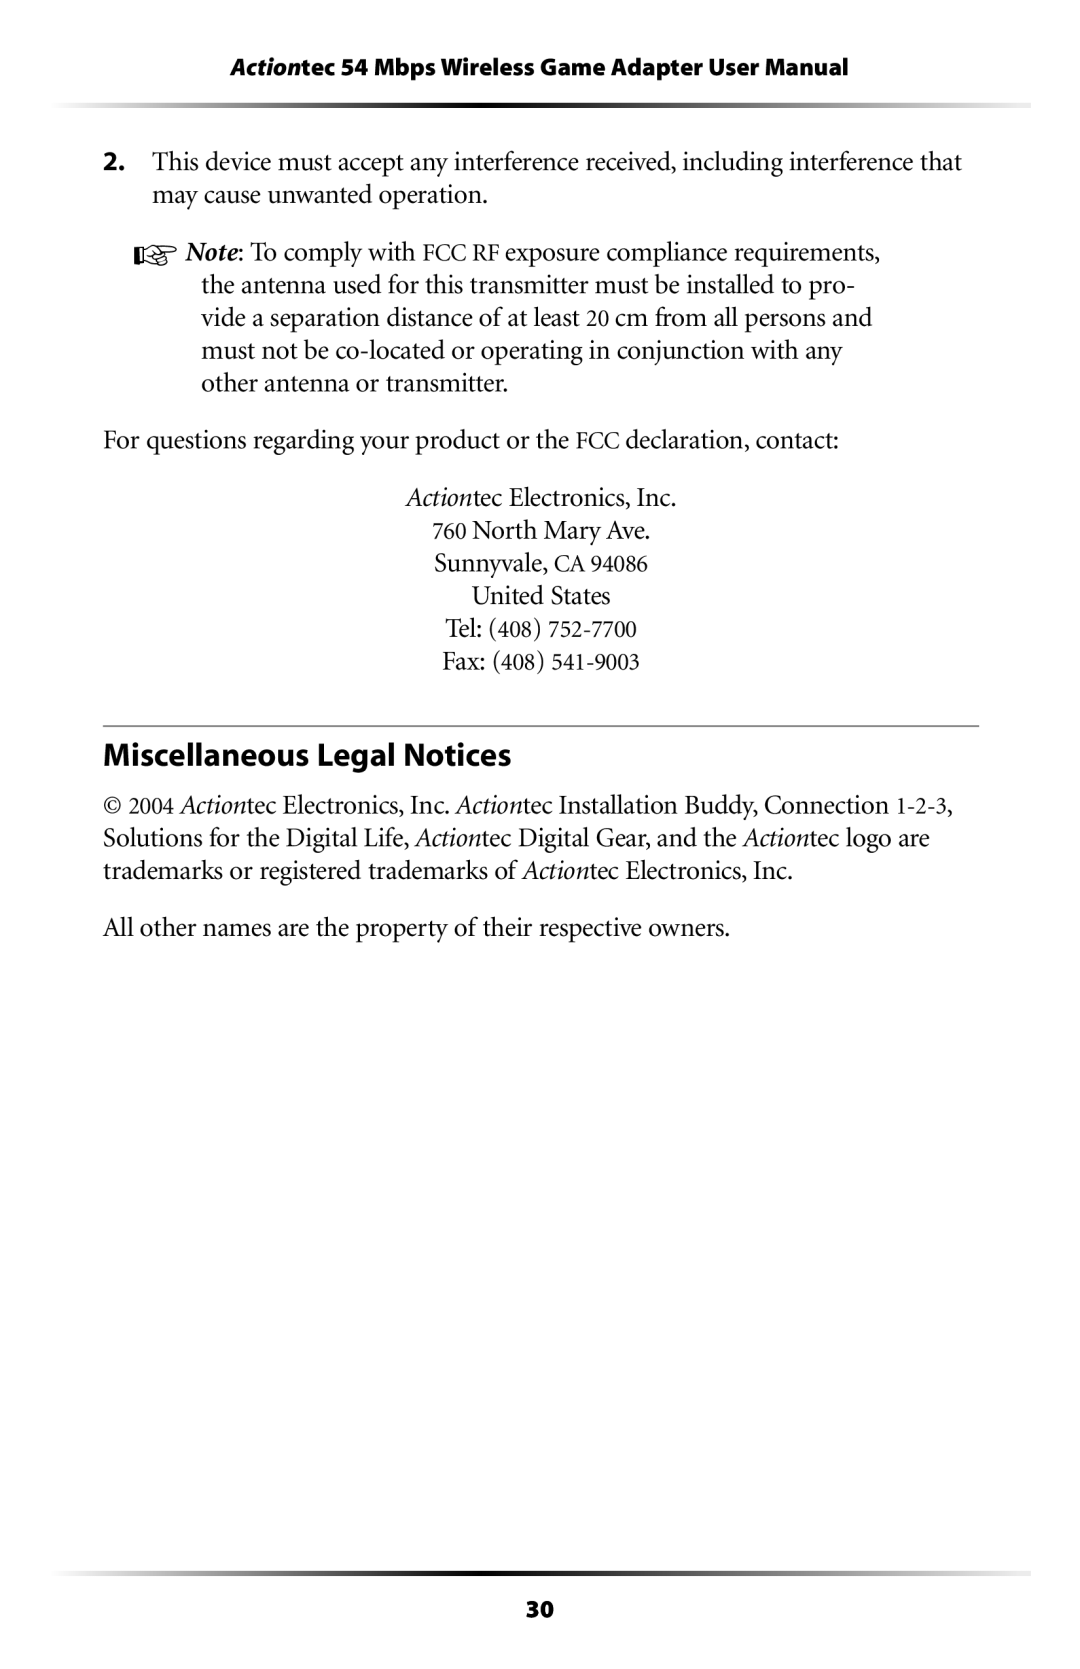 Actiontec electronic 802EAG user manual Miscellaneous Legal Notices 